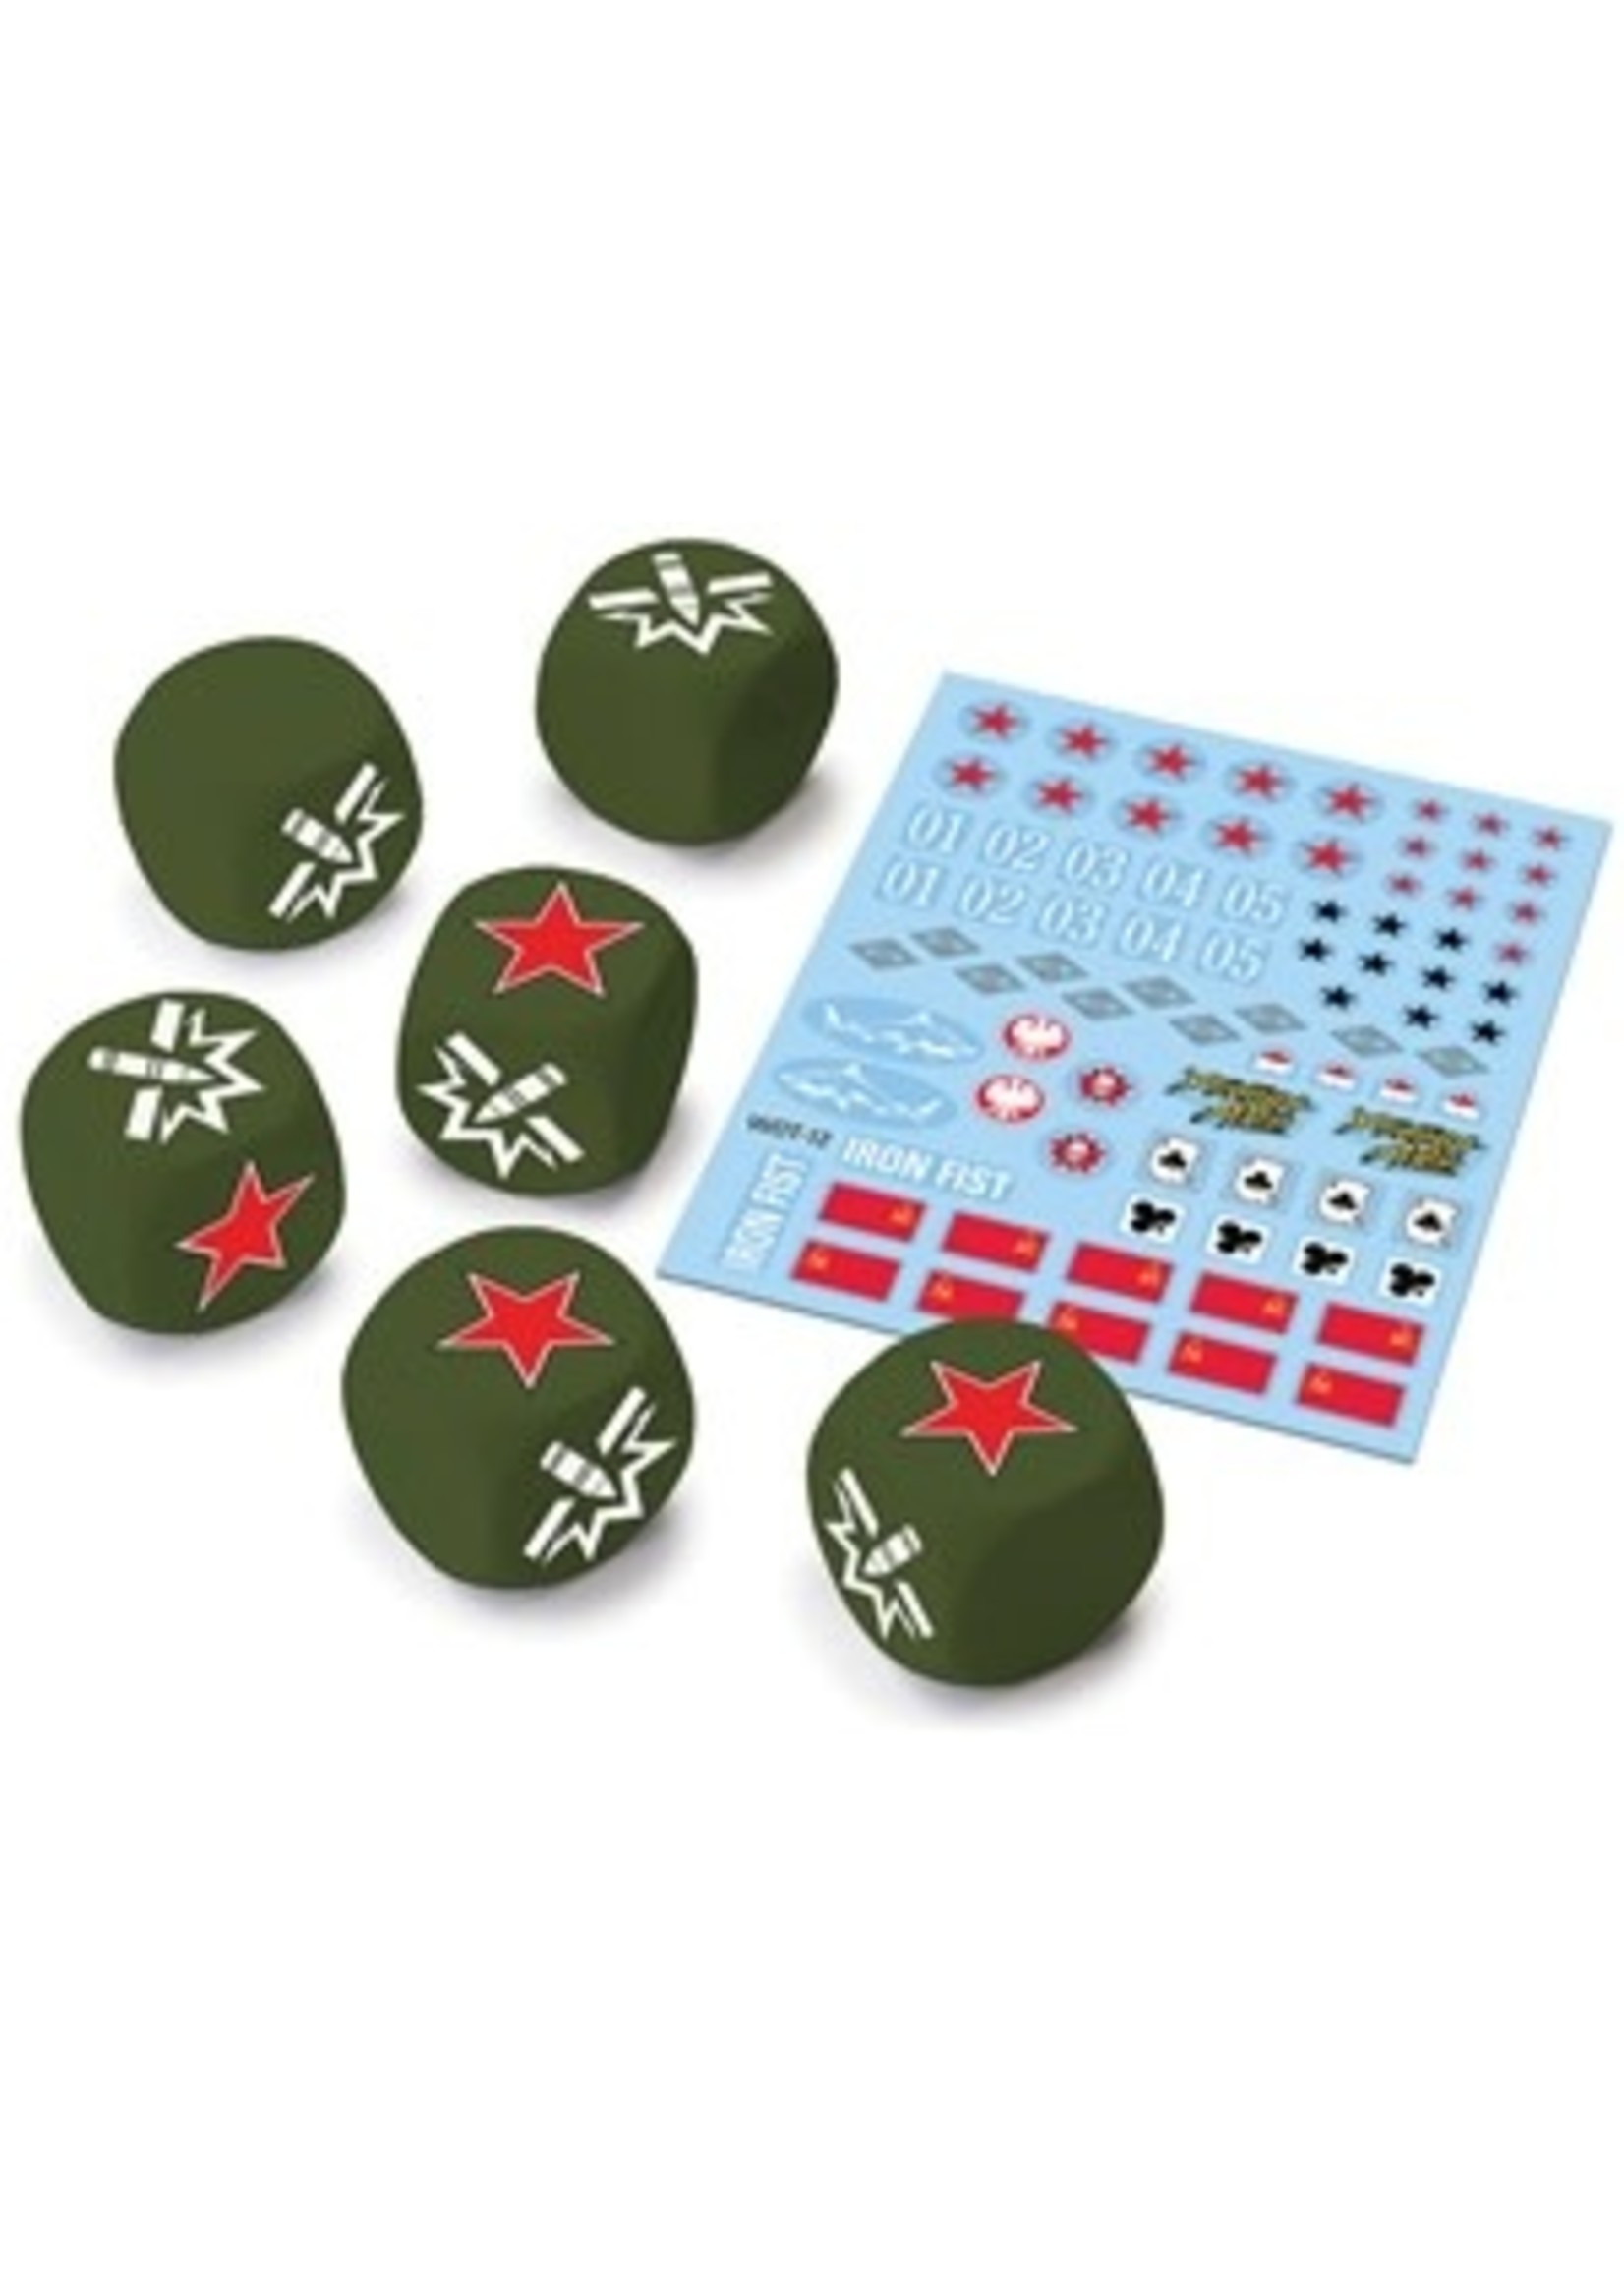 World Of Tanks World of Tanks: Miniatures Game - Soviet Upgrade Pack Dice (6) & Decal (1)